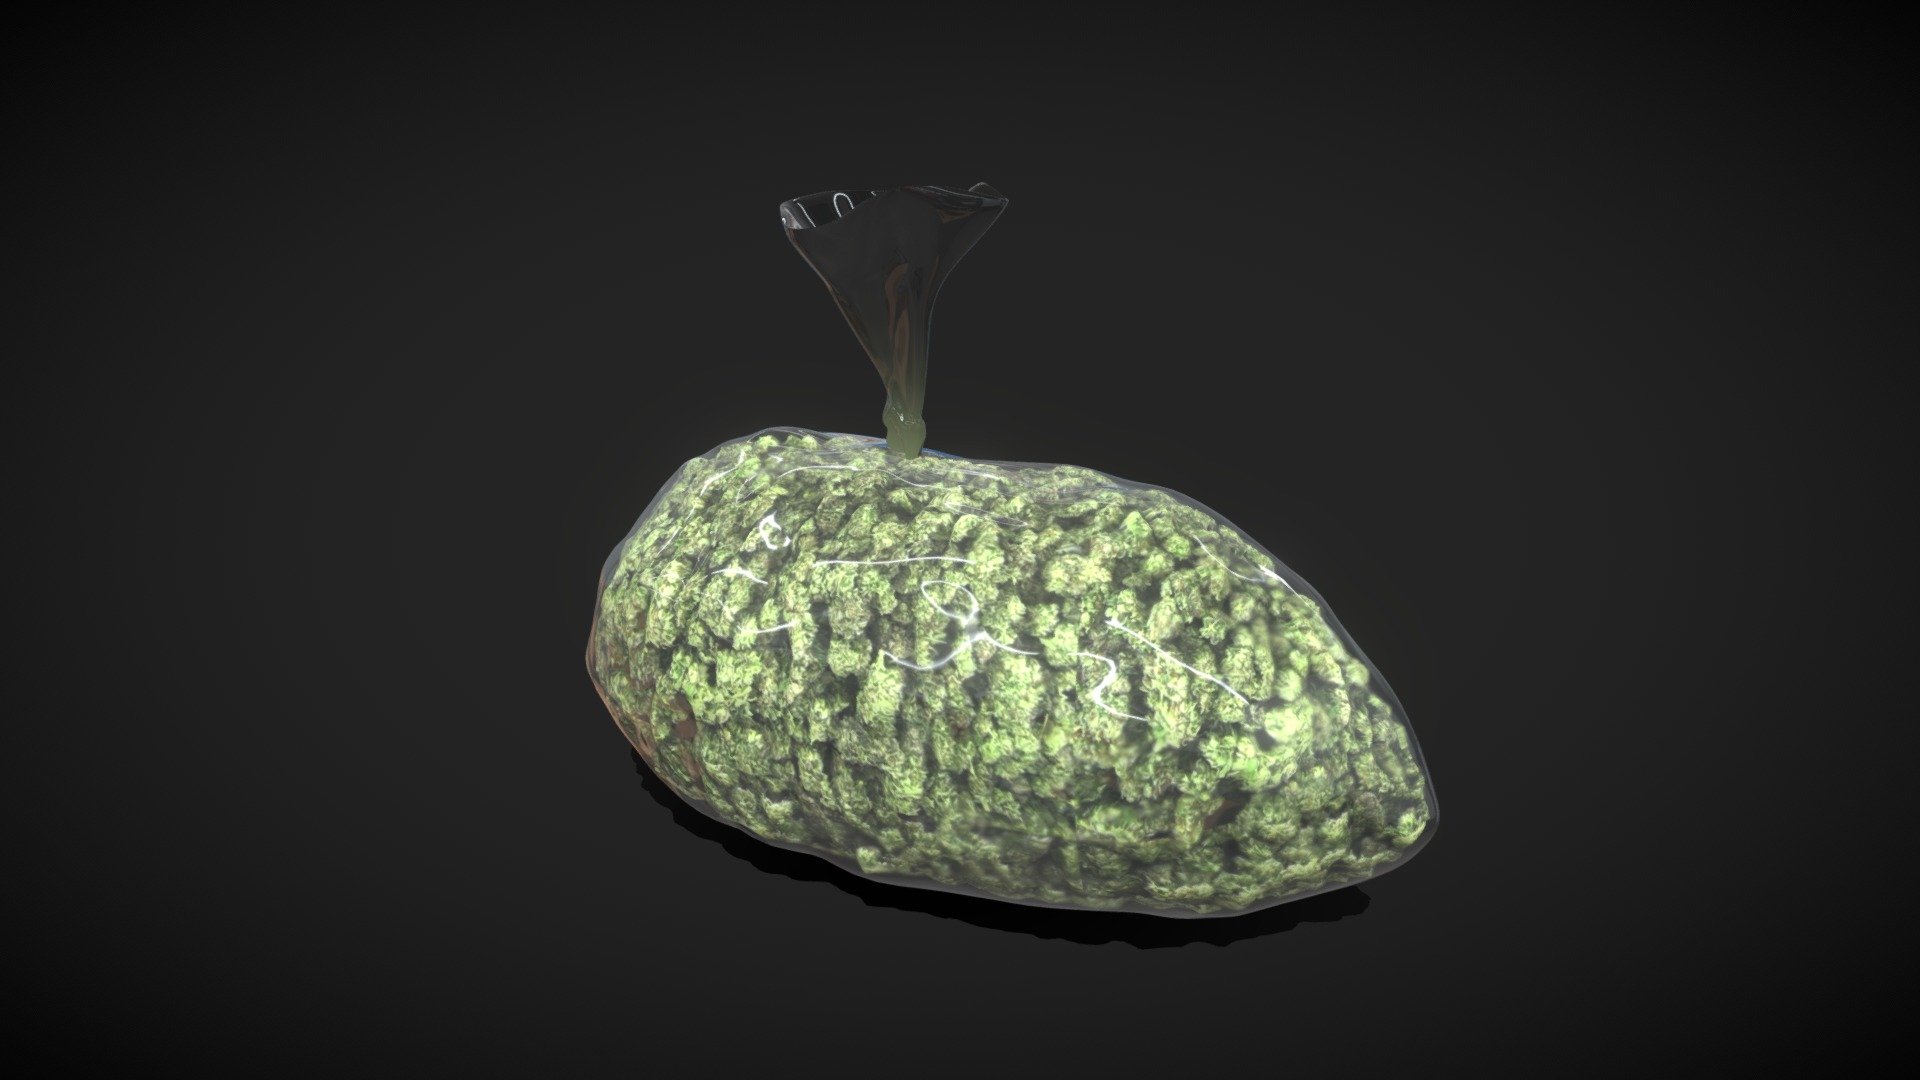 A Big Weed Bag i modeled from scratch in Blender.
Subdivision Ready, and Low Poly, this asset can be use in games, VR and real time environments 3d model